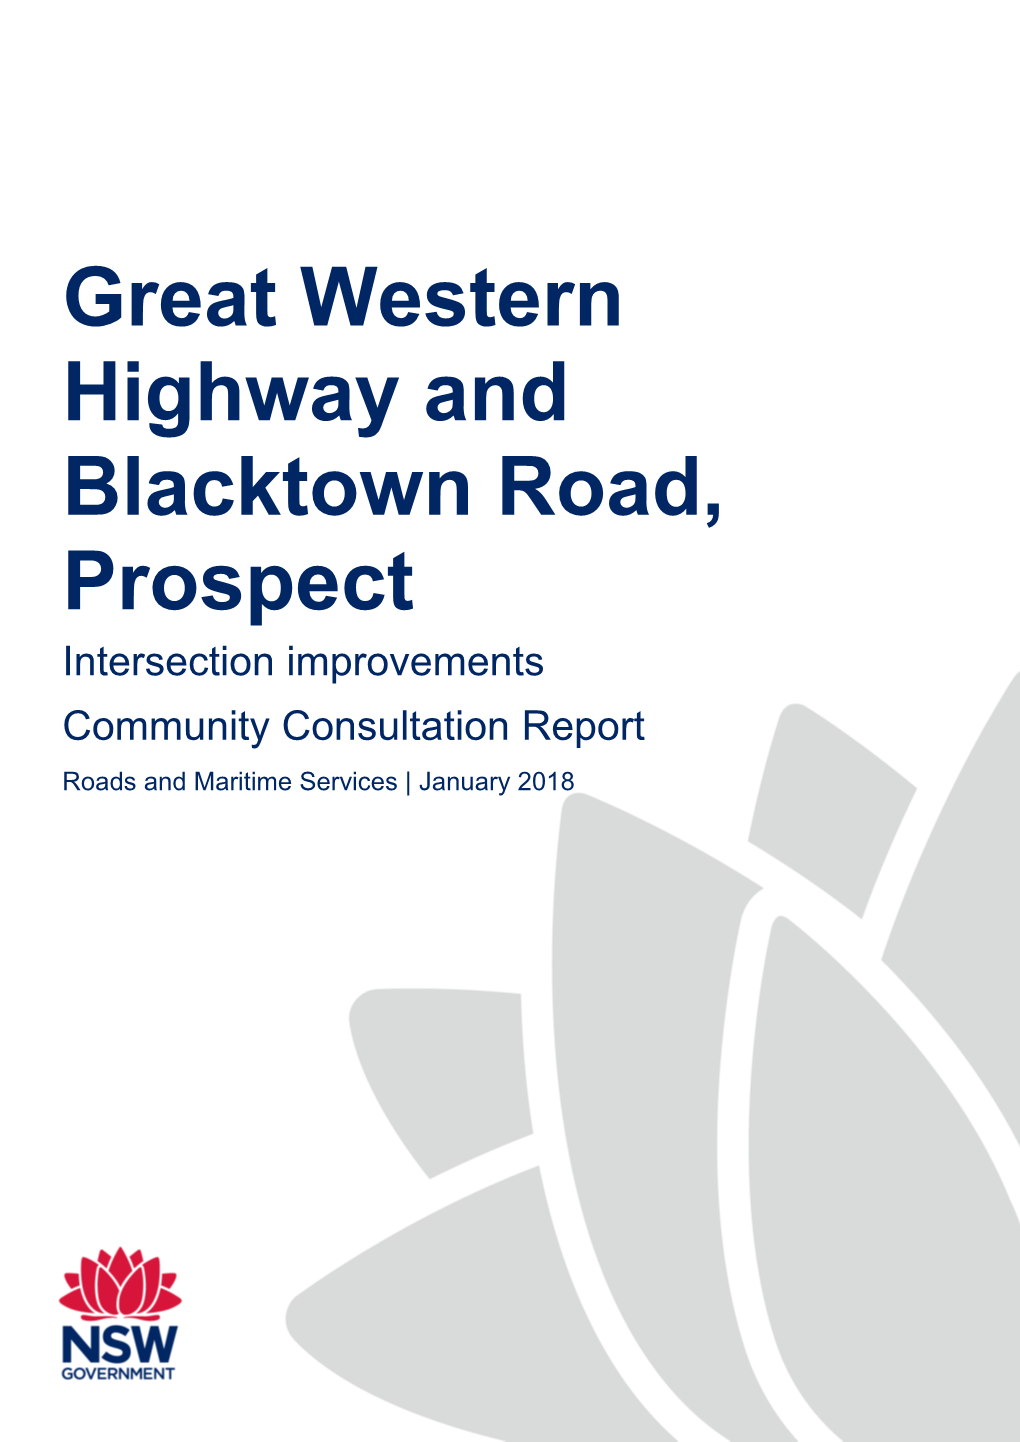 Great Western Highway and Blacktown Road, Prospect Intersection Improvements Community Consultation Report Roads and Maritime Services | January 2018